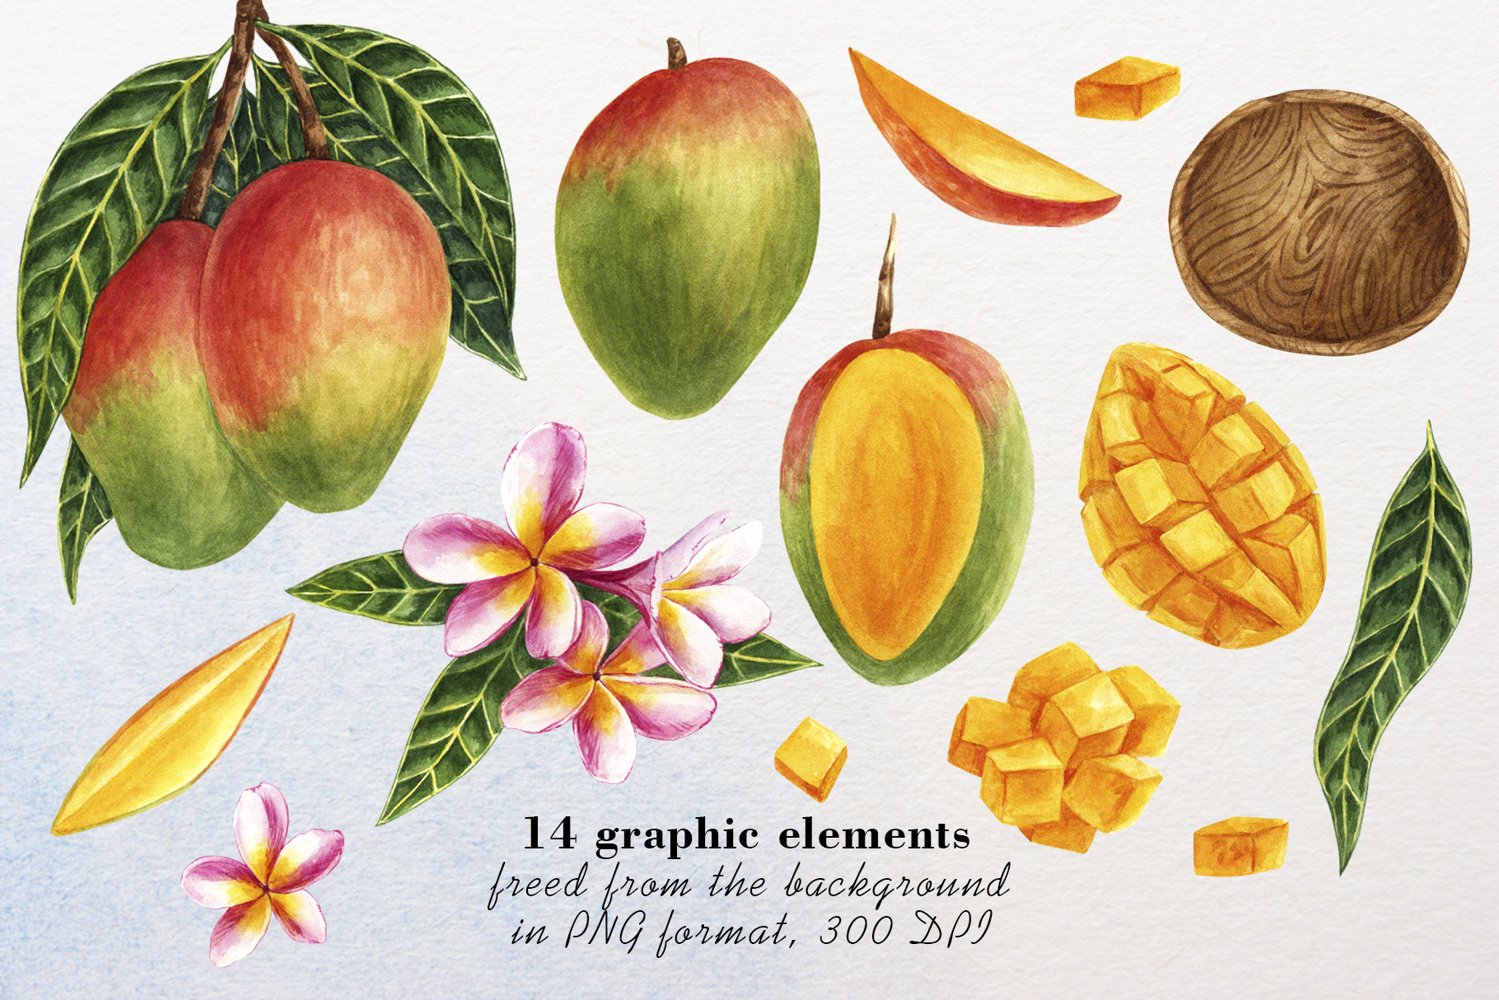 This set includes 14 graphic elements freed from the background in PNG format.